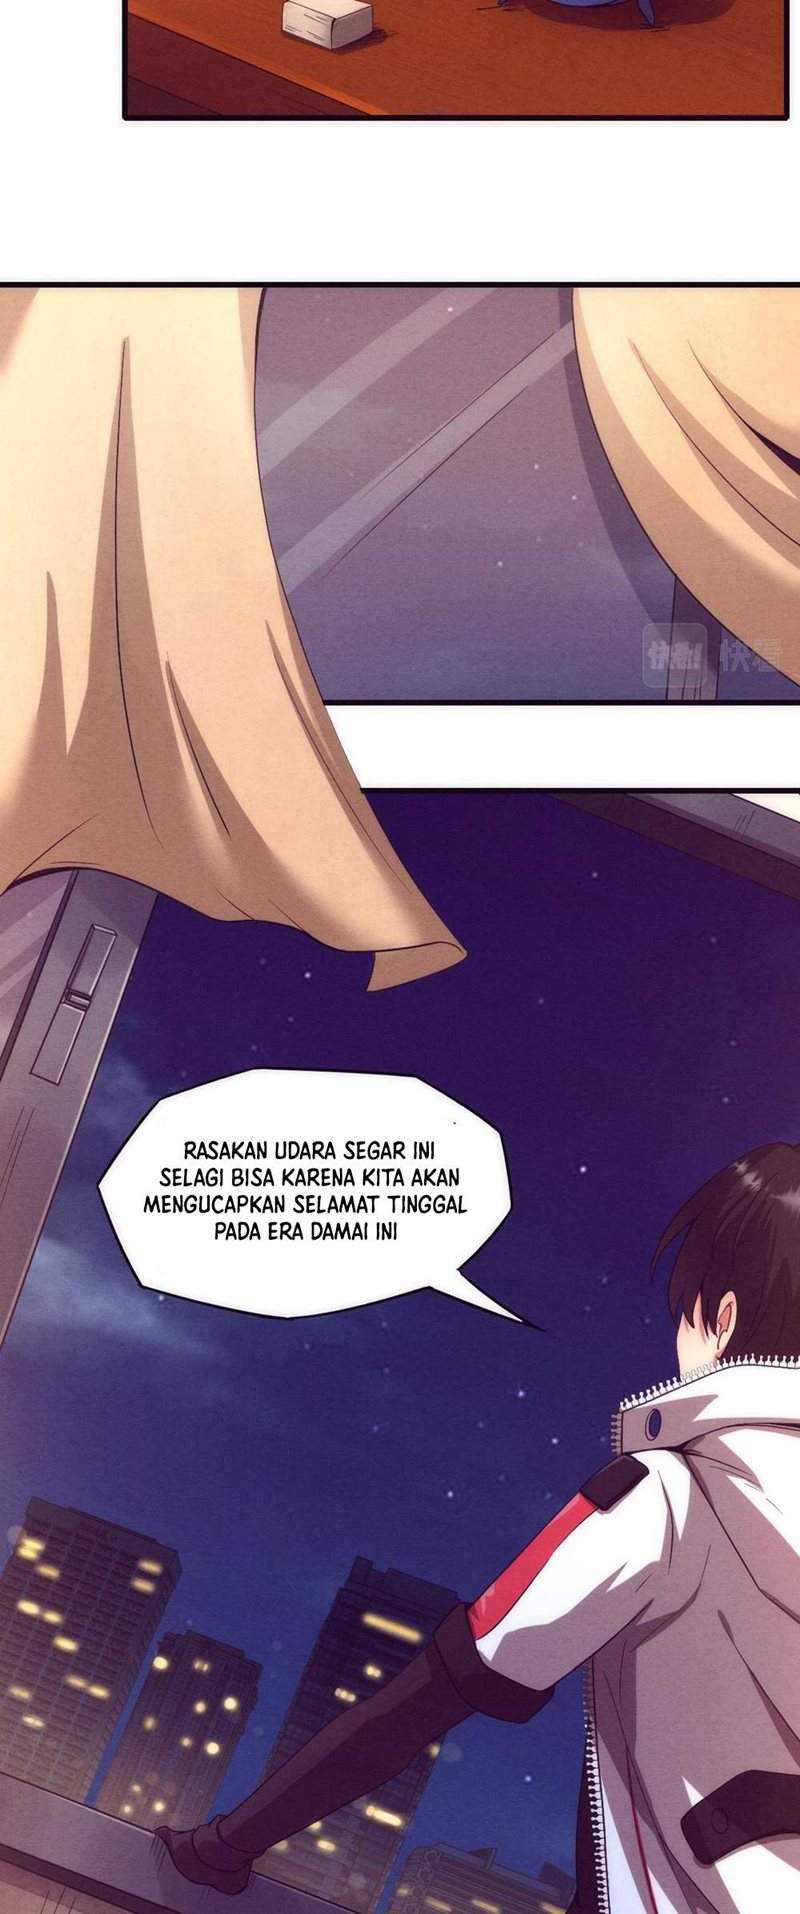 Evolution frenzy Chapter 01 bahasa indoensia